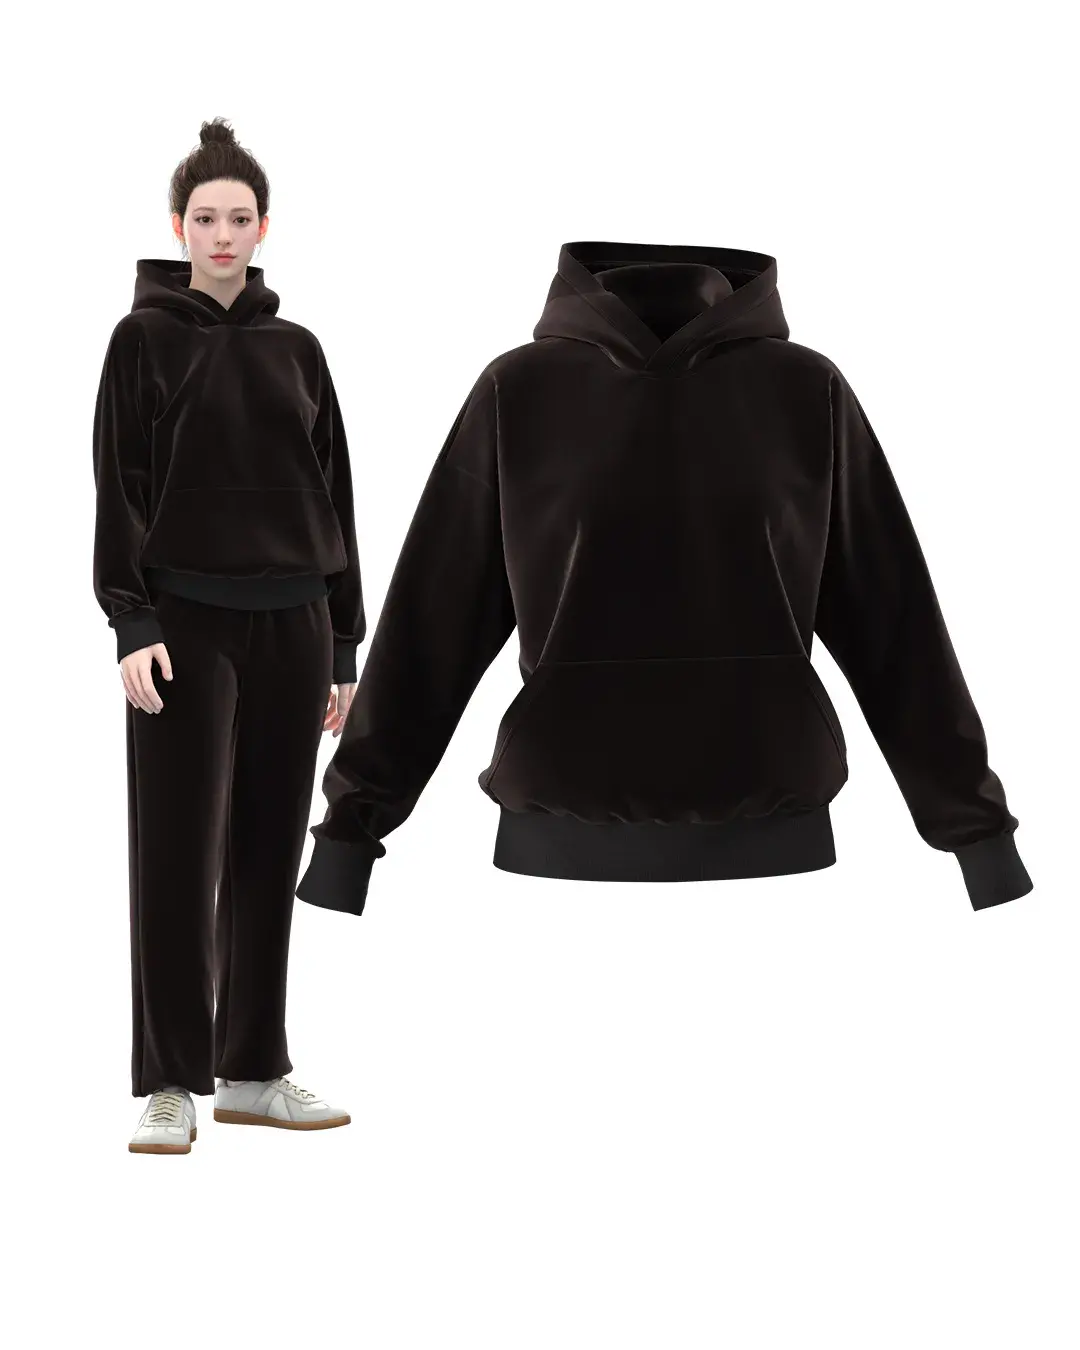 Hoodie patterns for women with a hood and a patch pocket